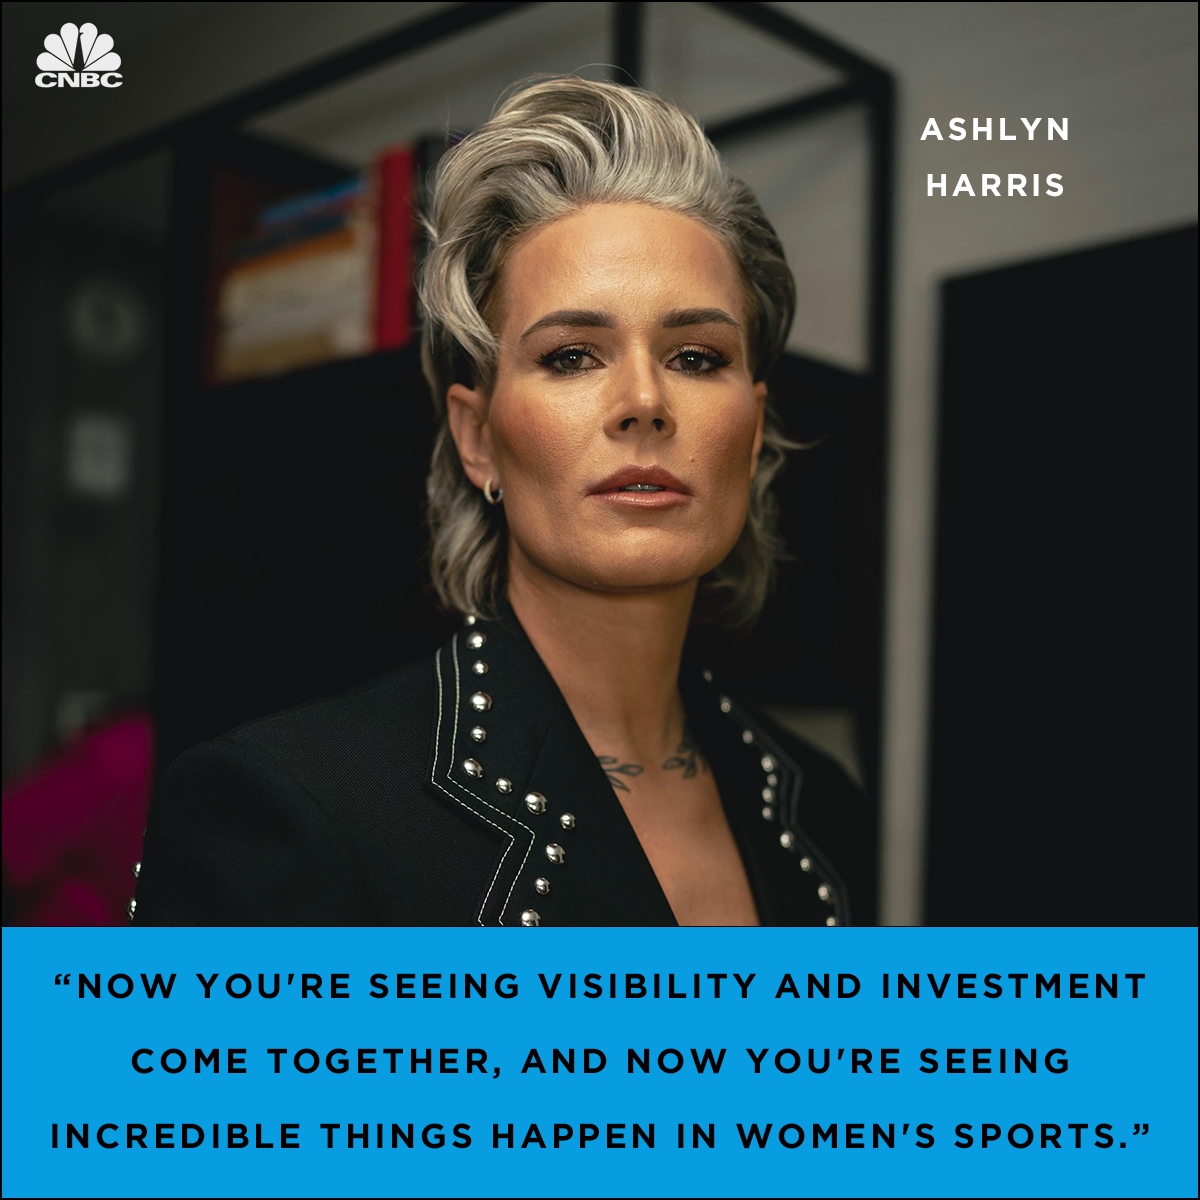 Former U.S. Women’s National Team & Gotham FC goalkeeper @Ashlyn_Harris is spreading the word about the value of women’s sports. #fifaworldcup #womenssports #sportsbusiness